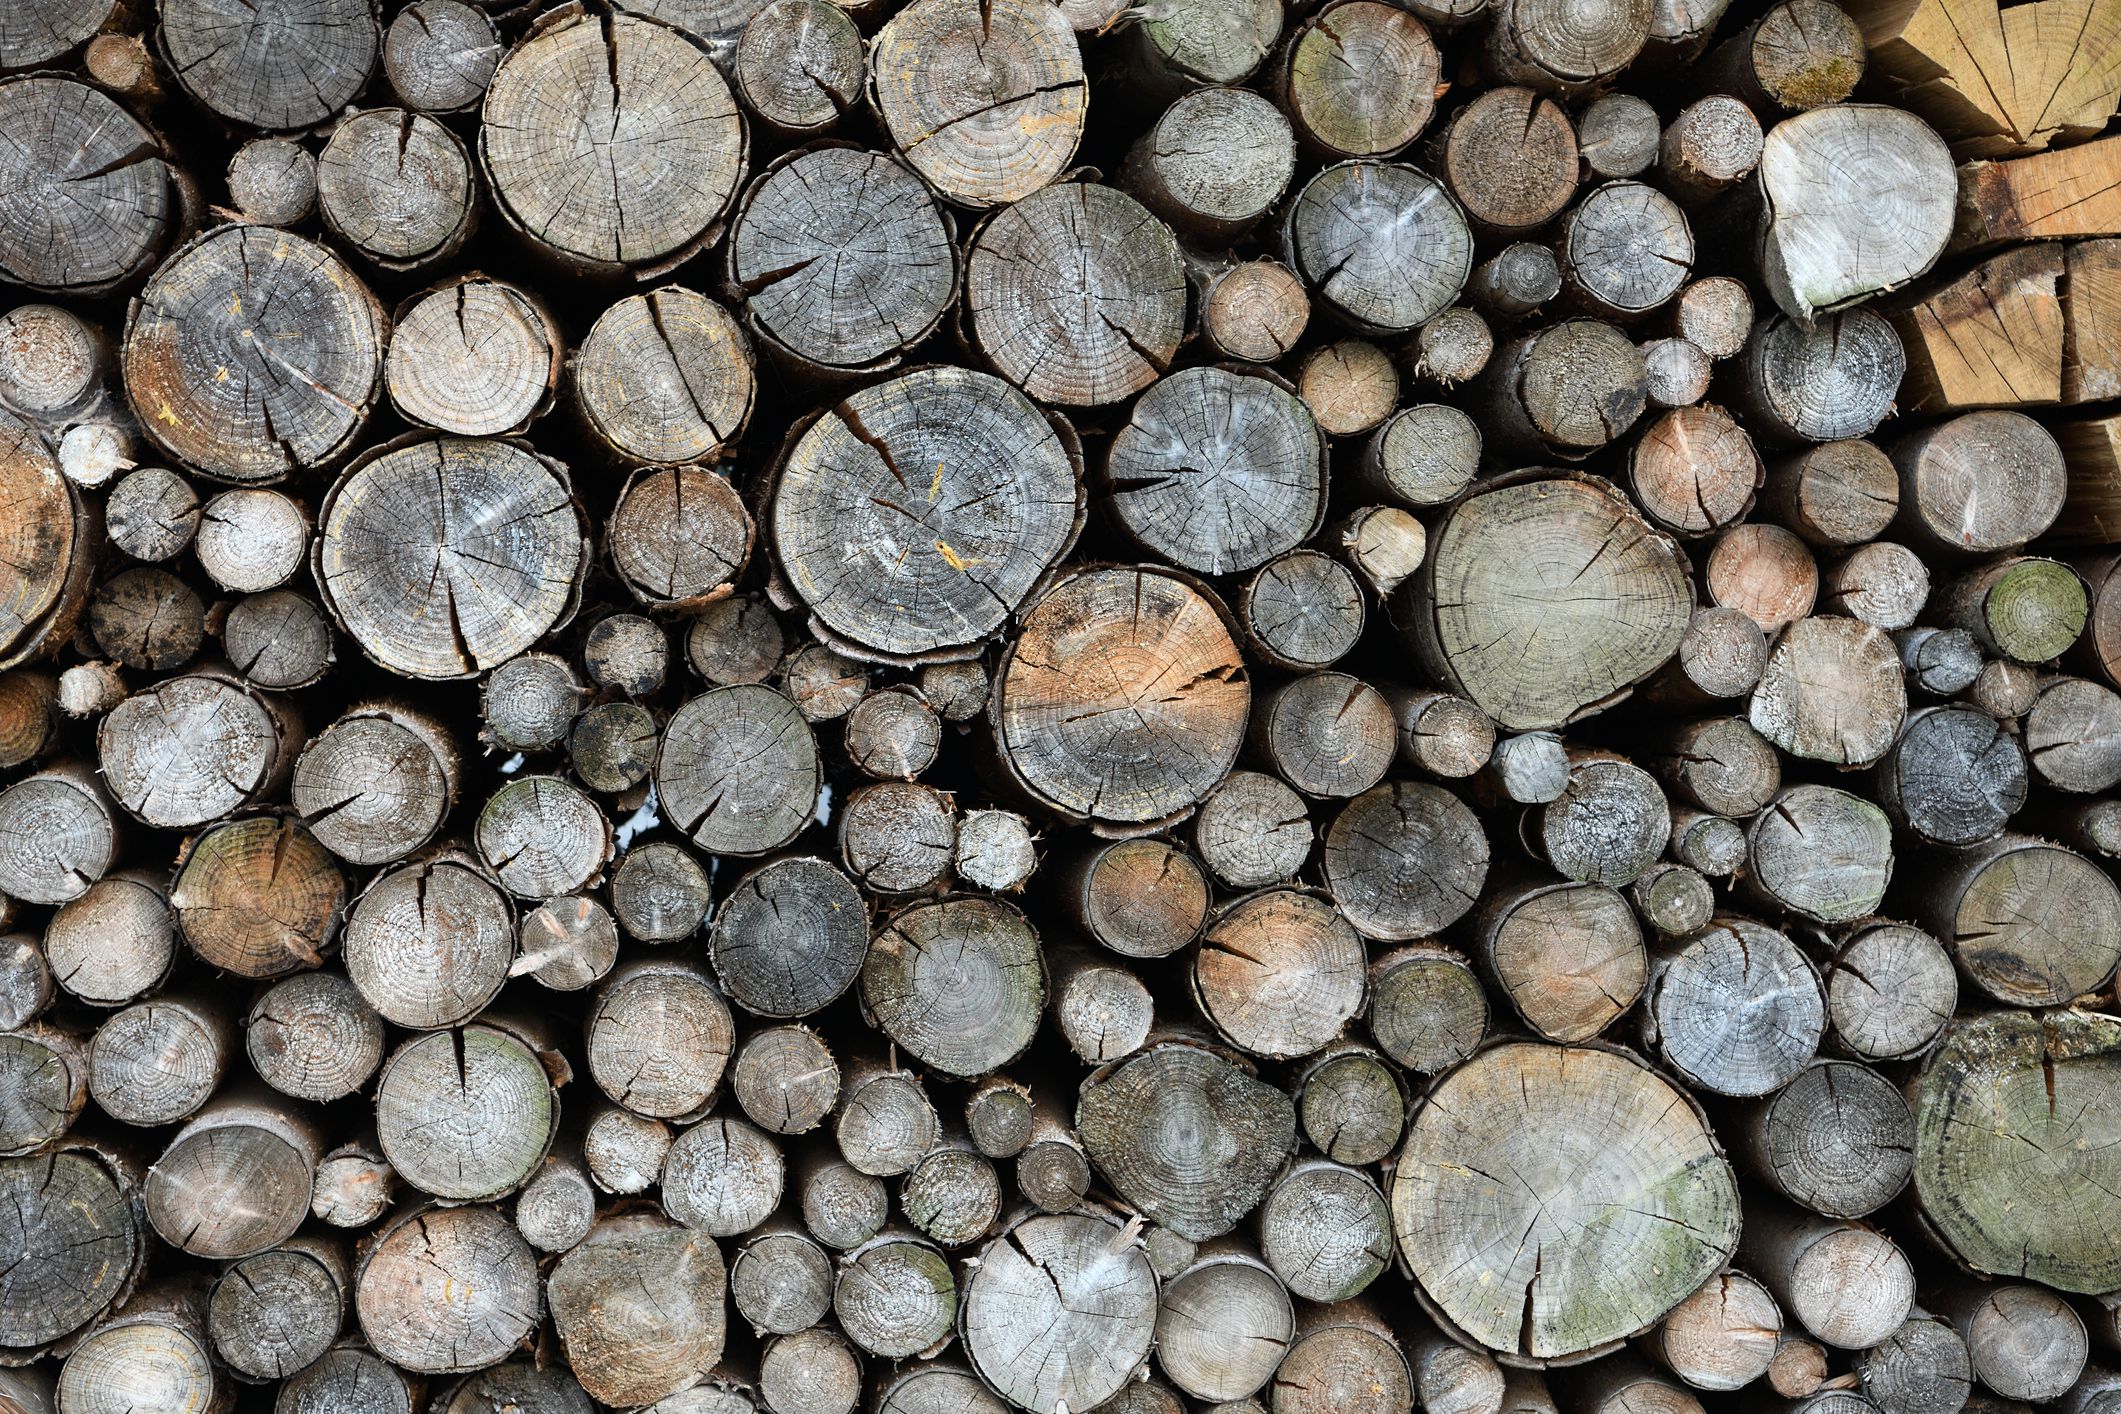 White Birch Fireplace Logs Best Of the Best Firewood for Your Wood Stove or Fireplace